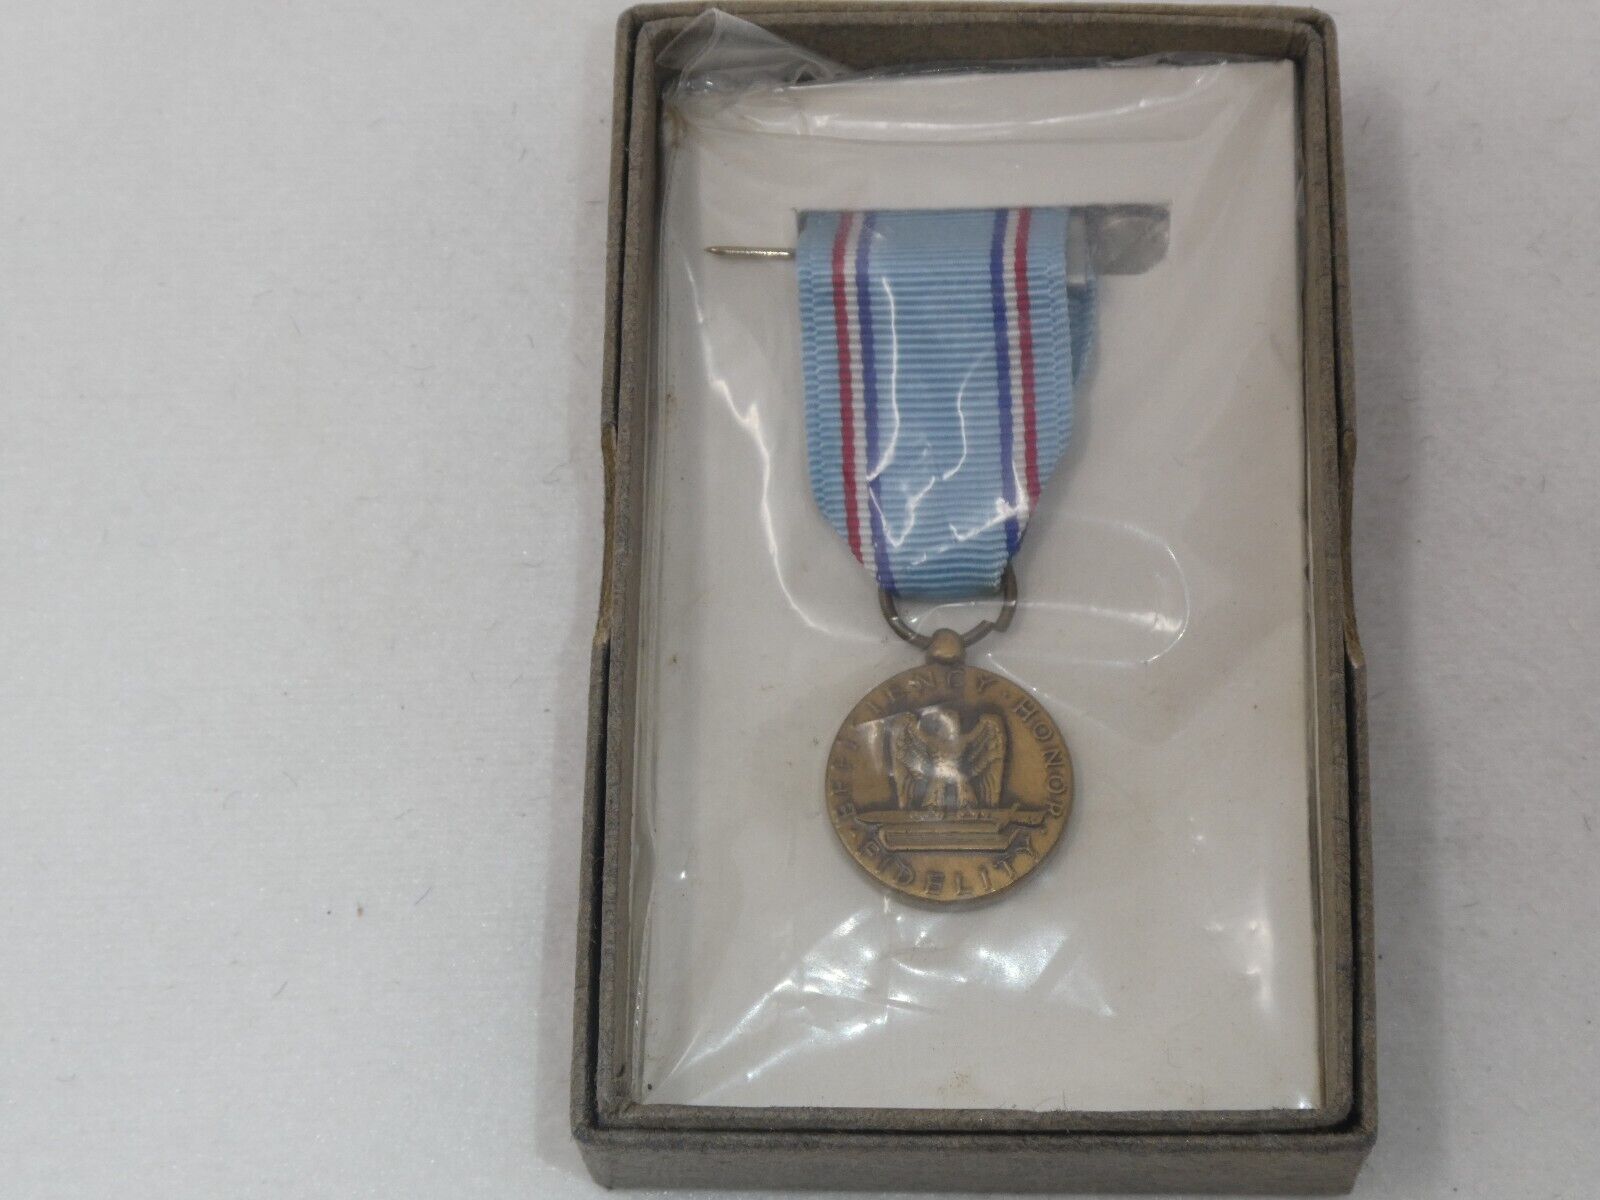 VINTAGE EFFICIENCY HONOR FIDELITY FOR GOOD CONDUCT MINIATURE MEDAL SEALED